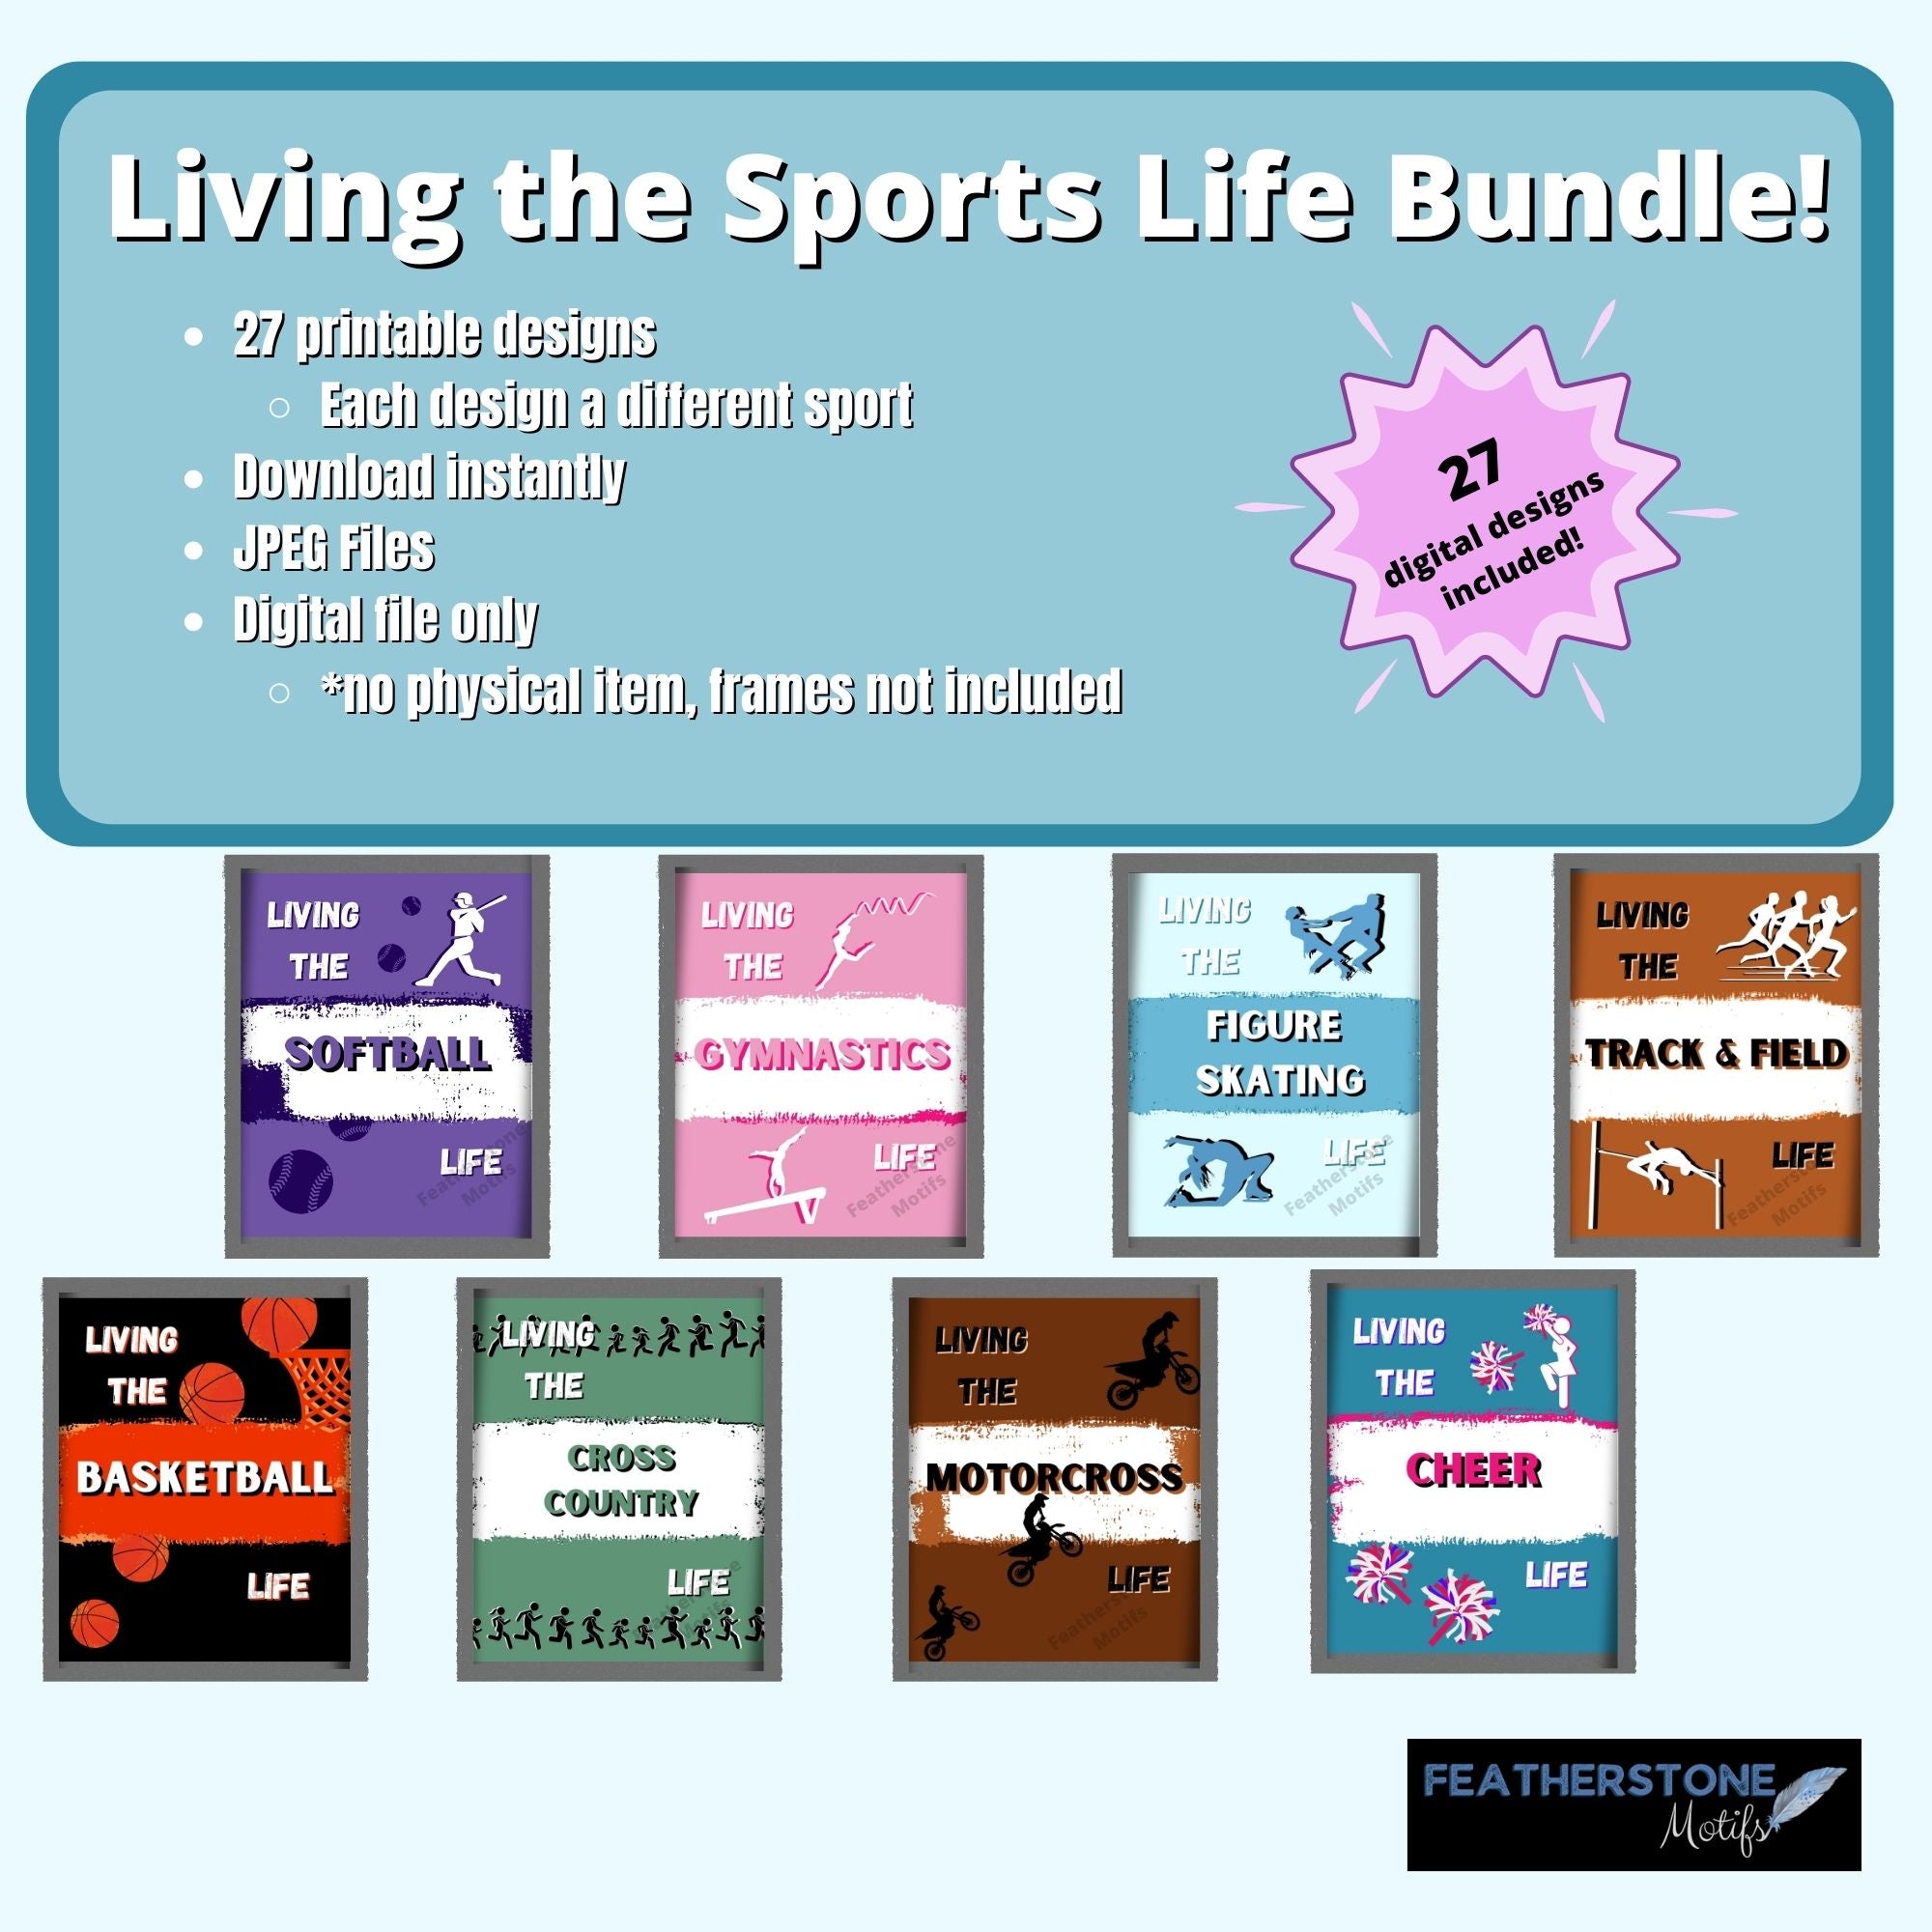 What are your favorite sports? This download set has 27 different images, from badminton to wrestling! Favorites include football, baseball, volleyball, and cheer. 